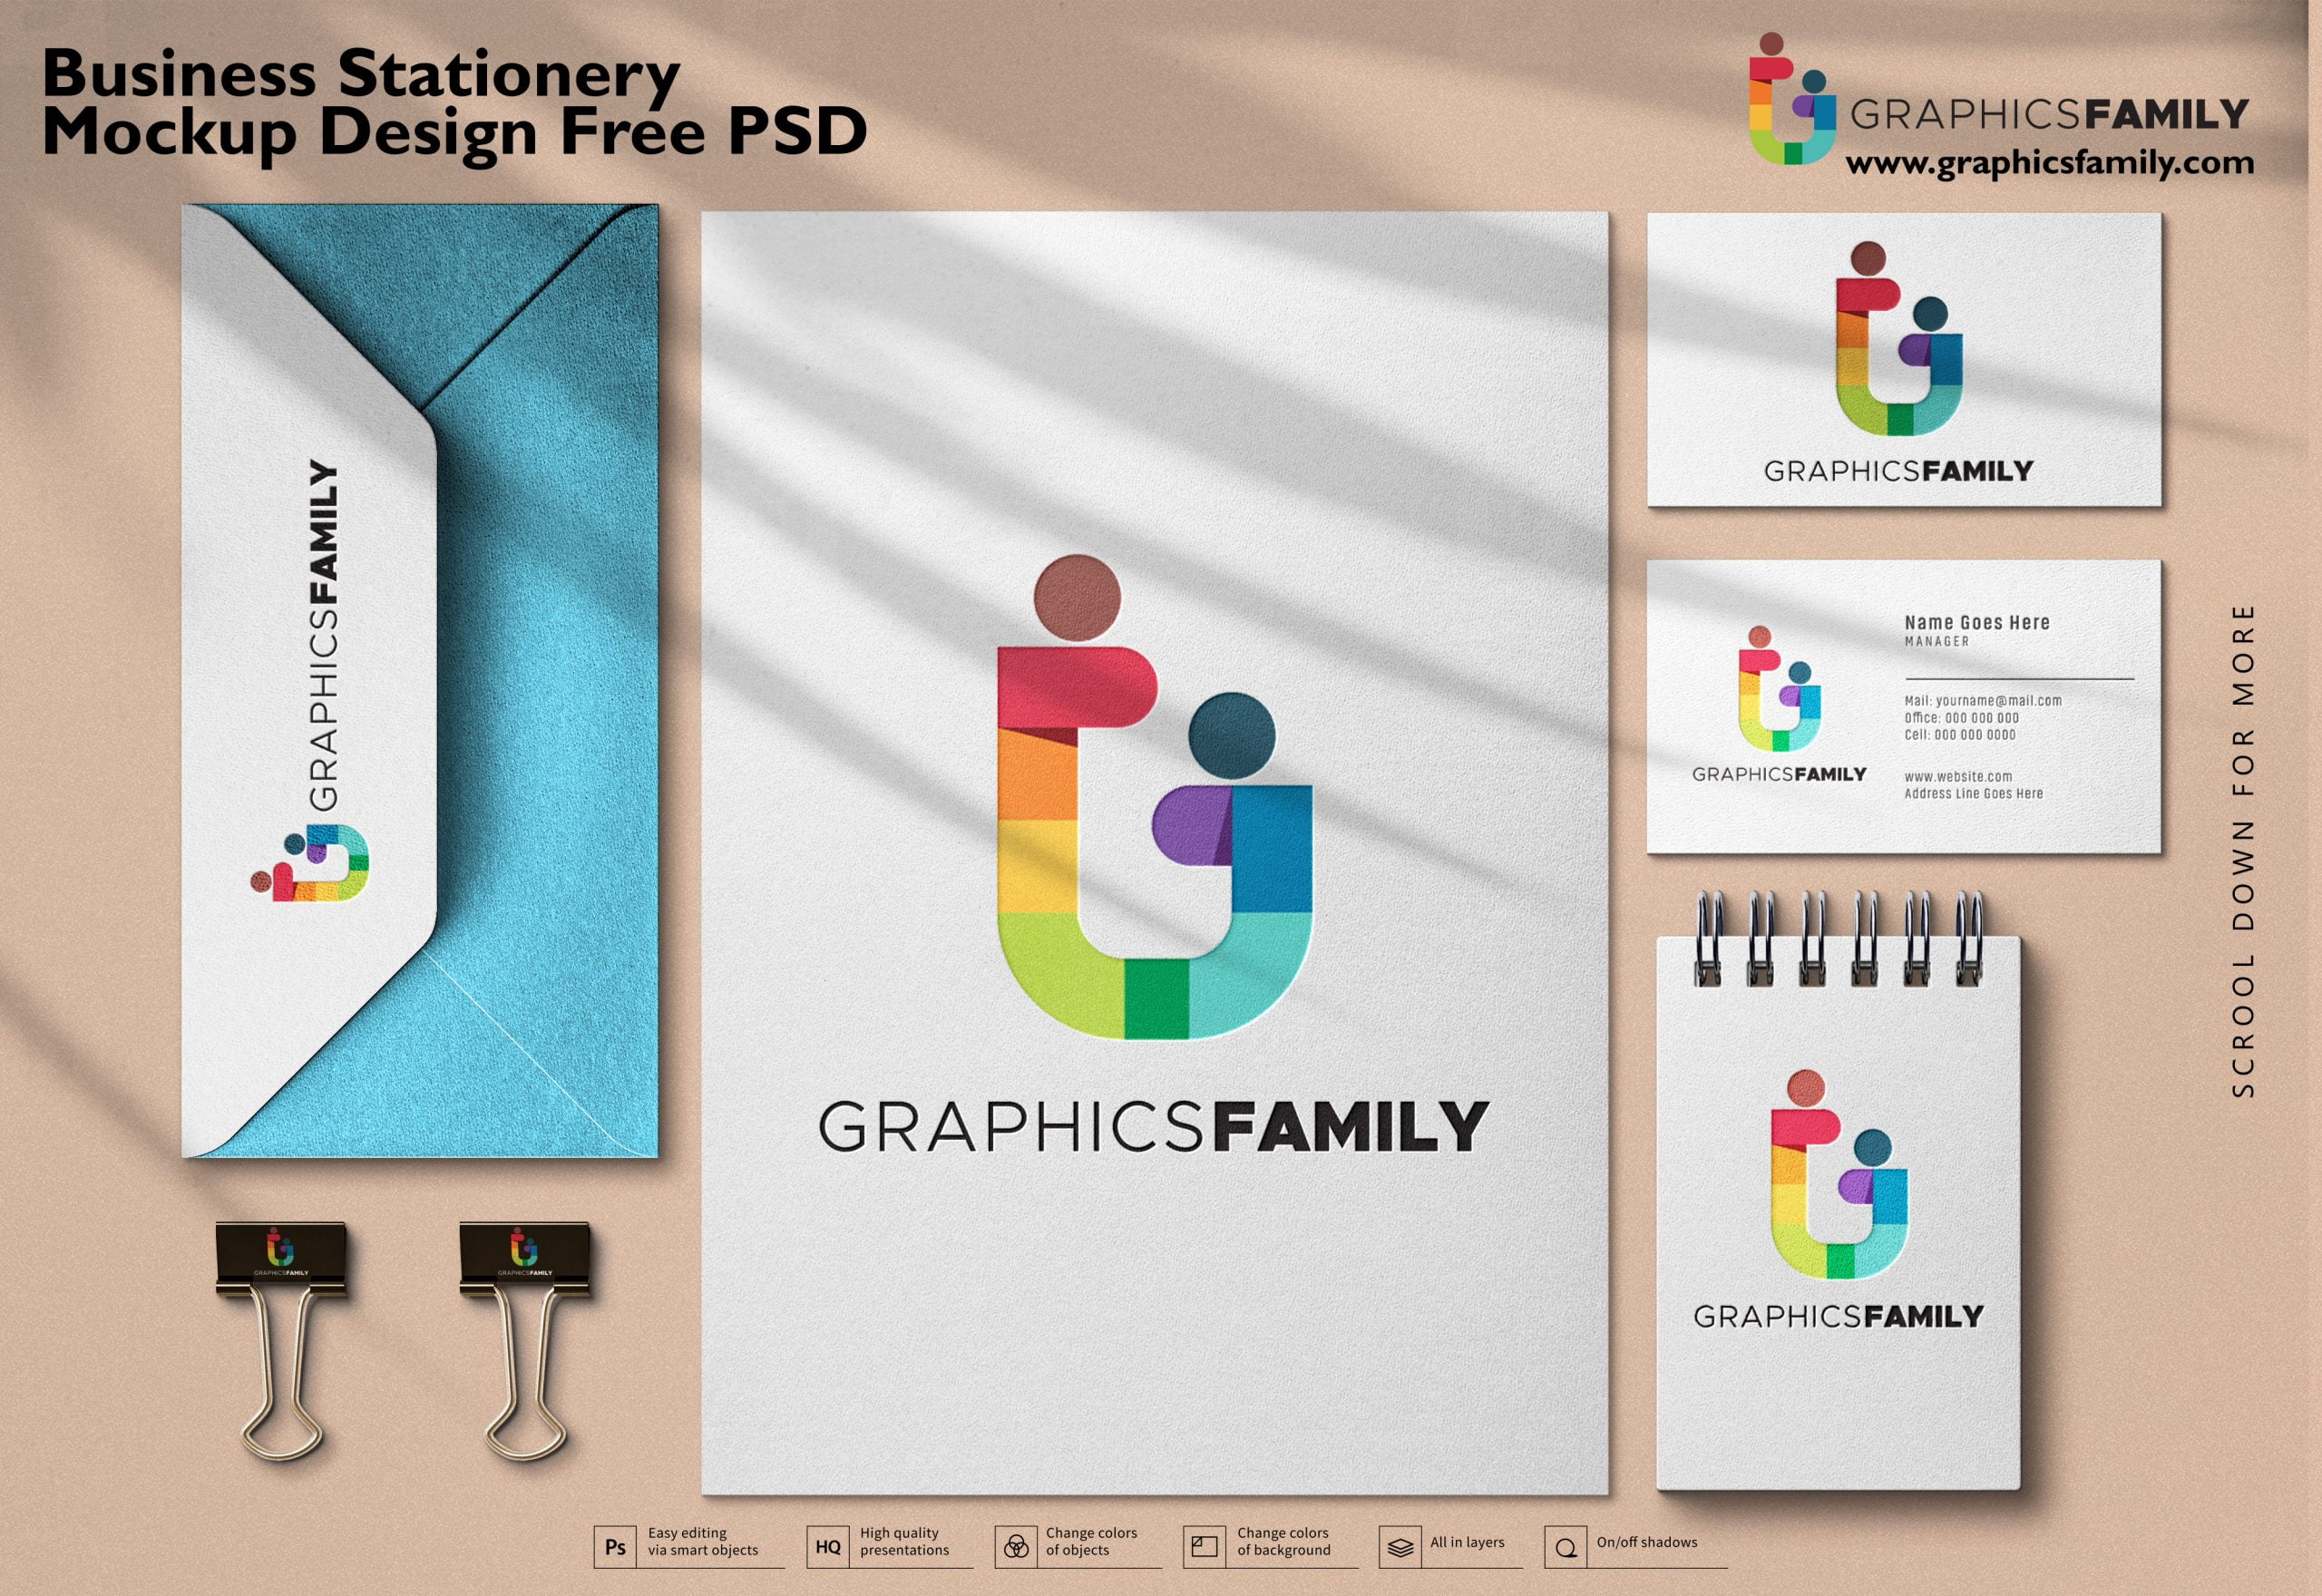 Business Stationery Mock-Up Design Free PSD – GraphicsFamily